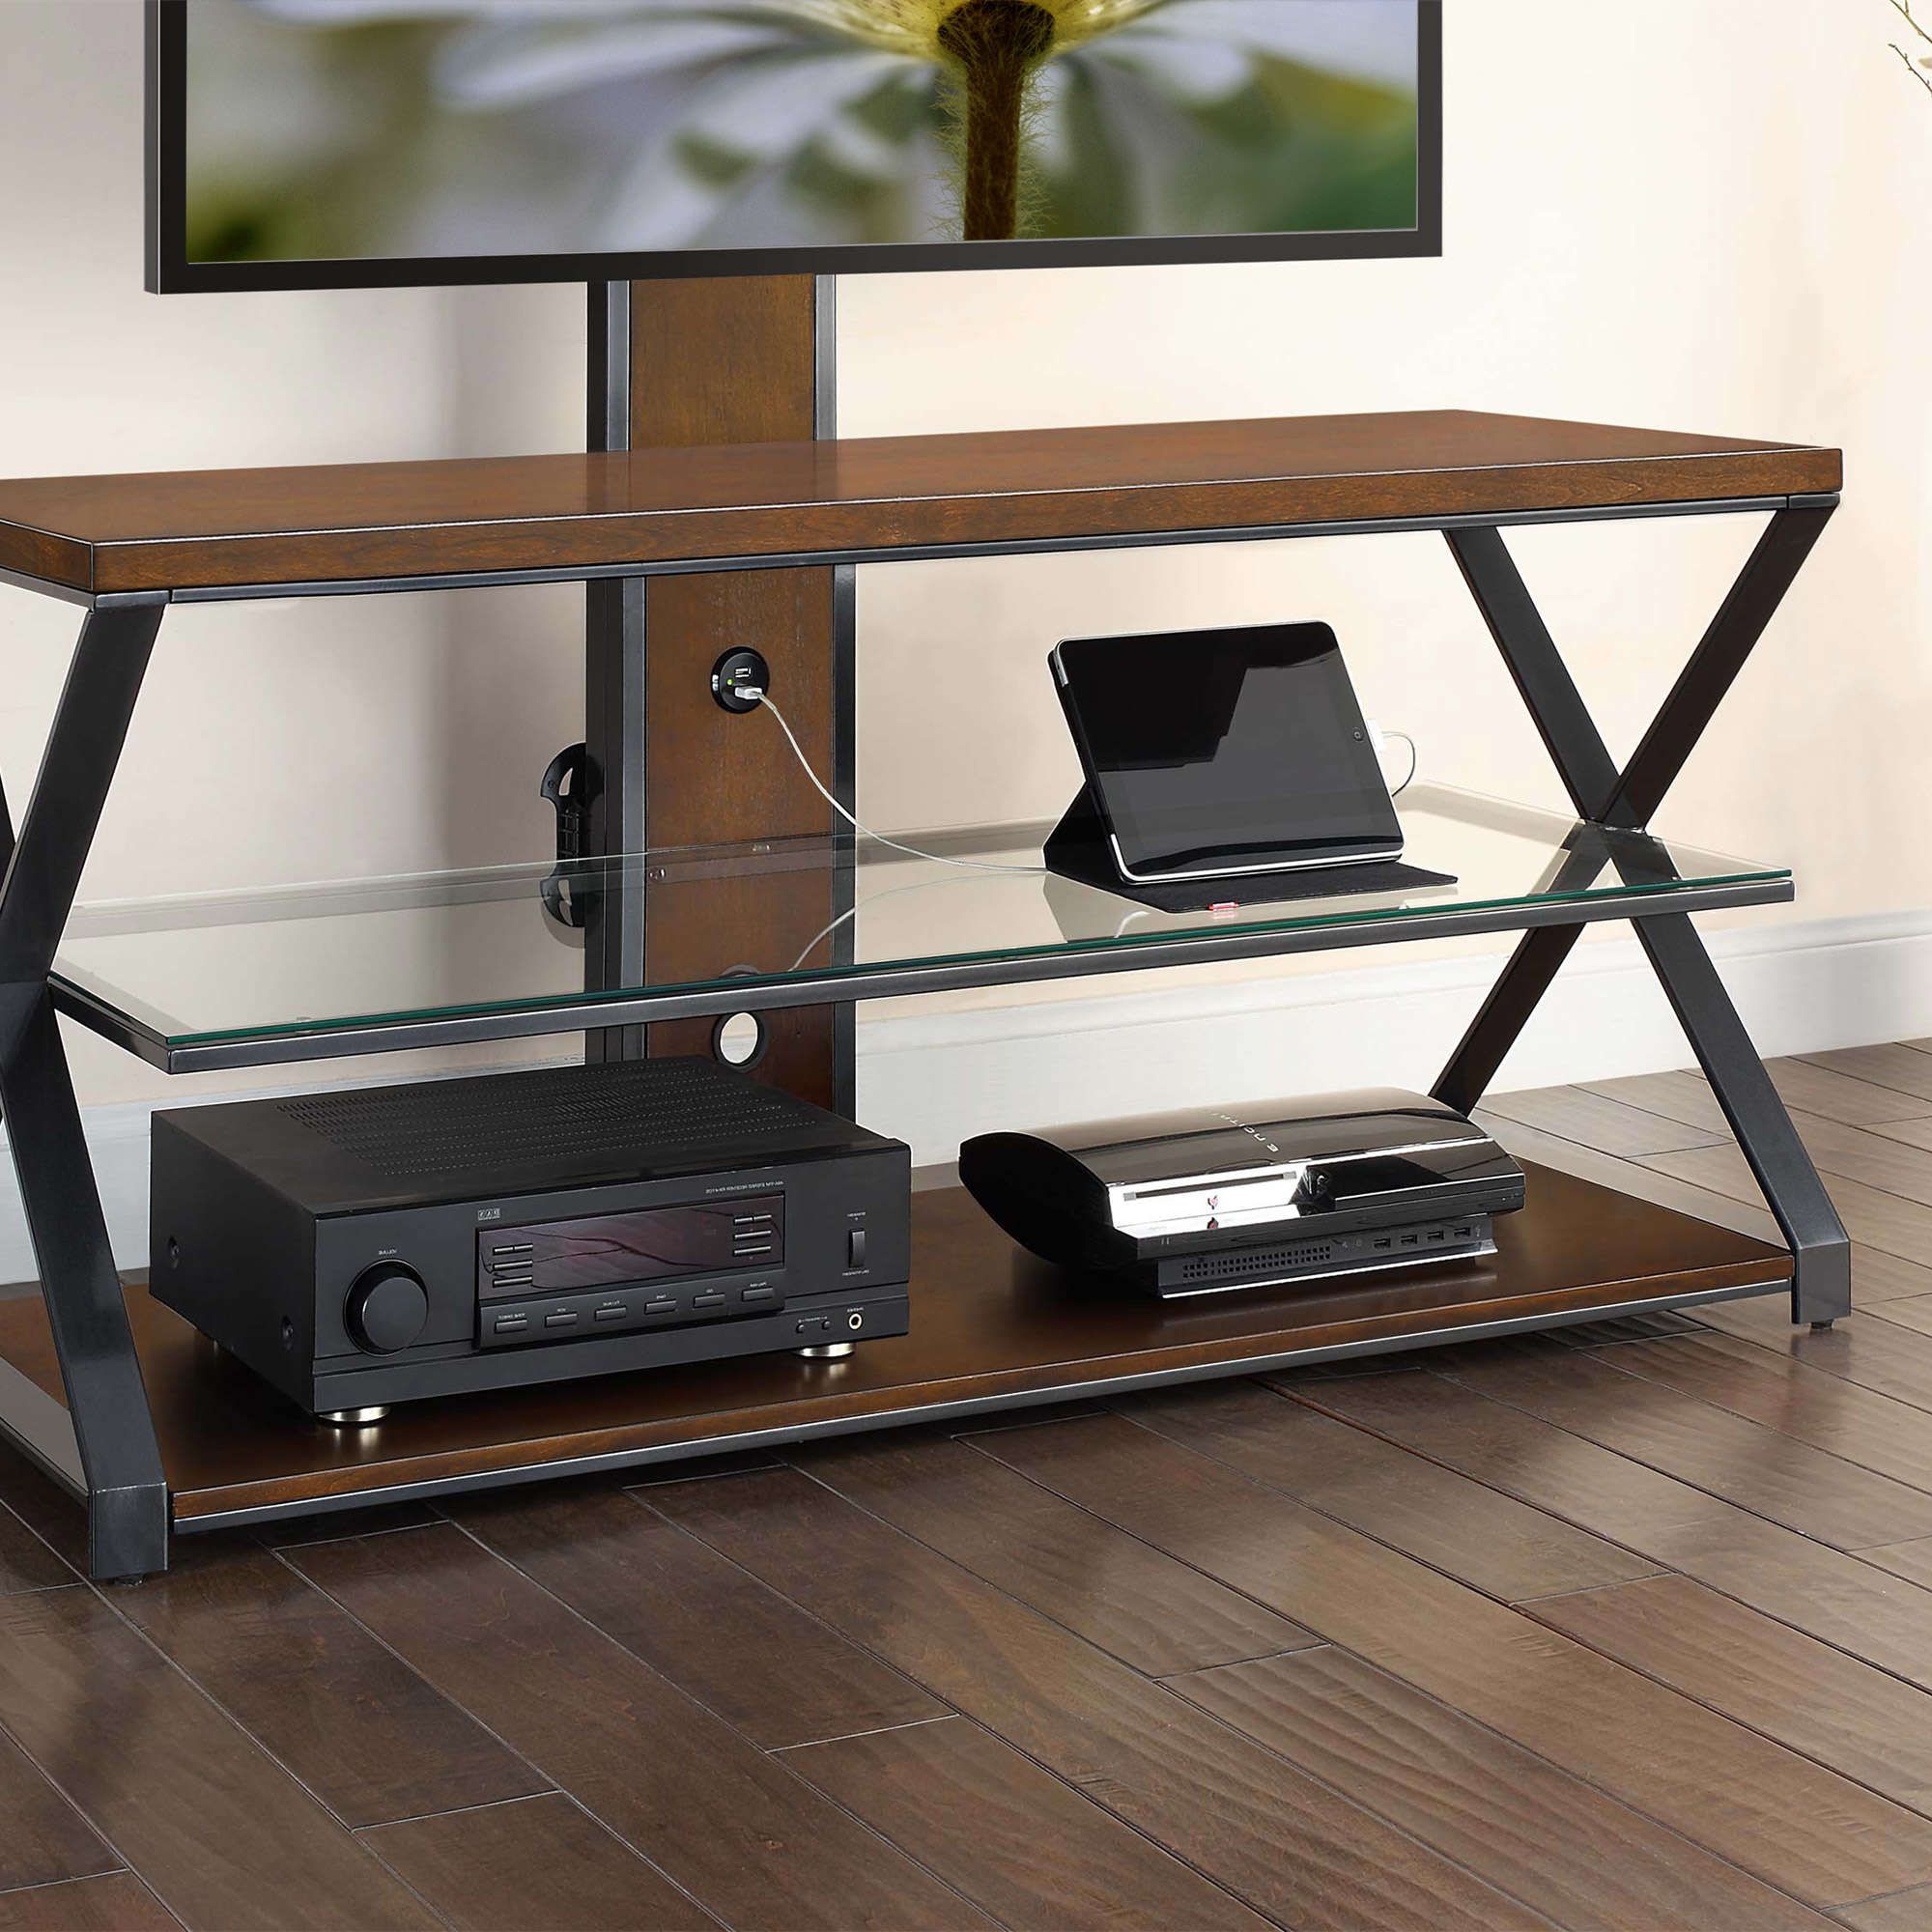 Jaxon 3 In 1 Cognac Tv Stand For Tvs Up To 70" – Walmart Within Trendy Jaxon 71 Inch Tv Stands (Photo 10 of 20)